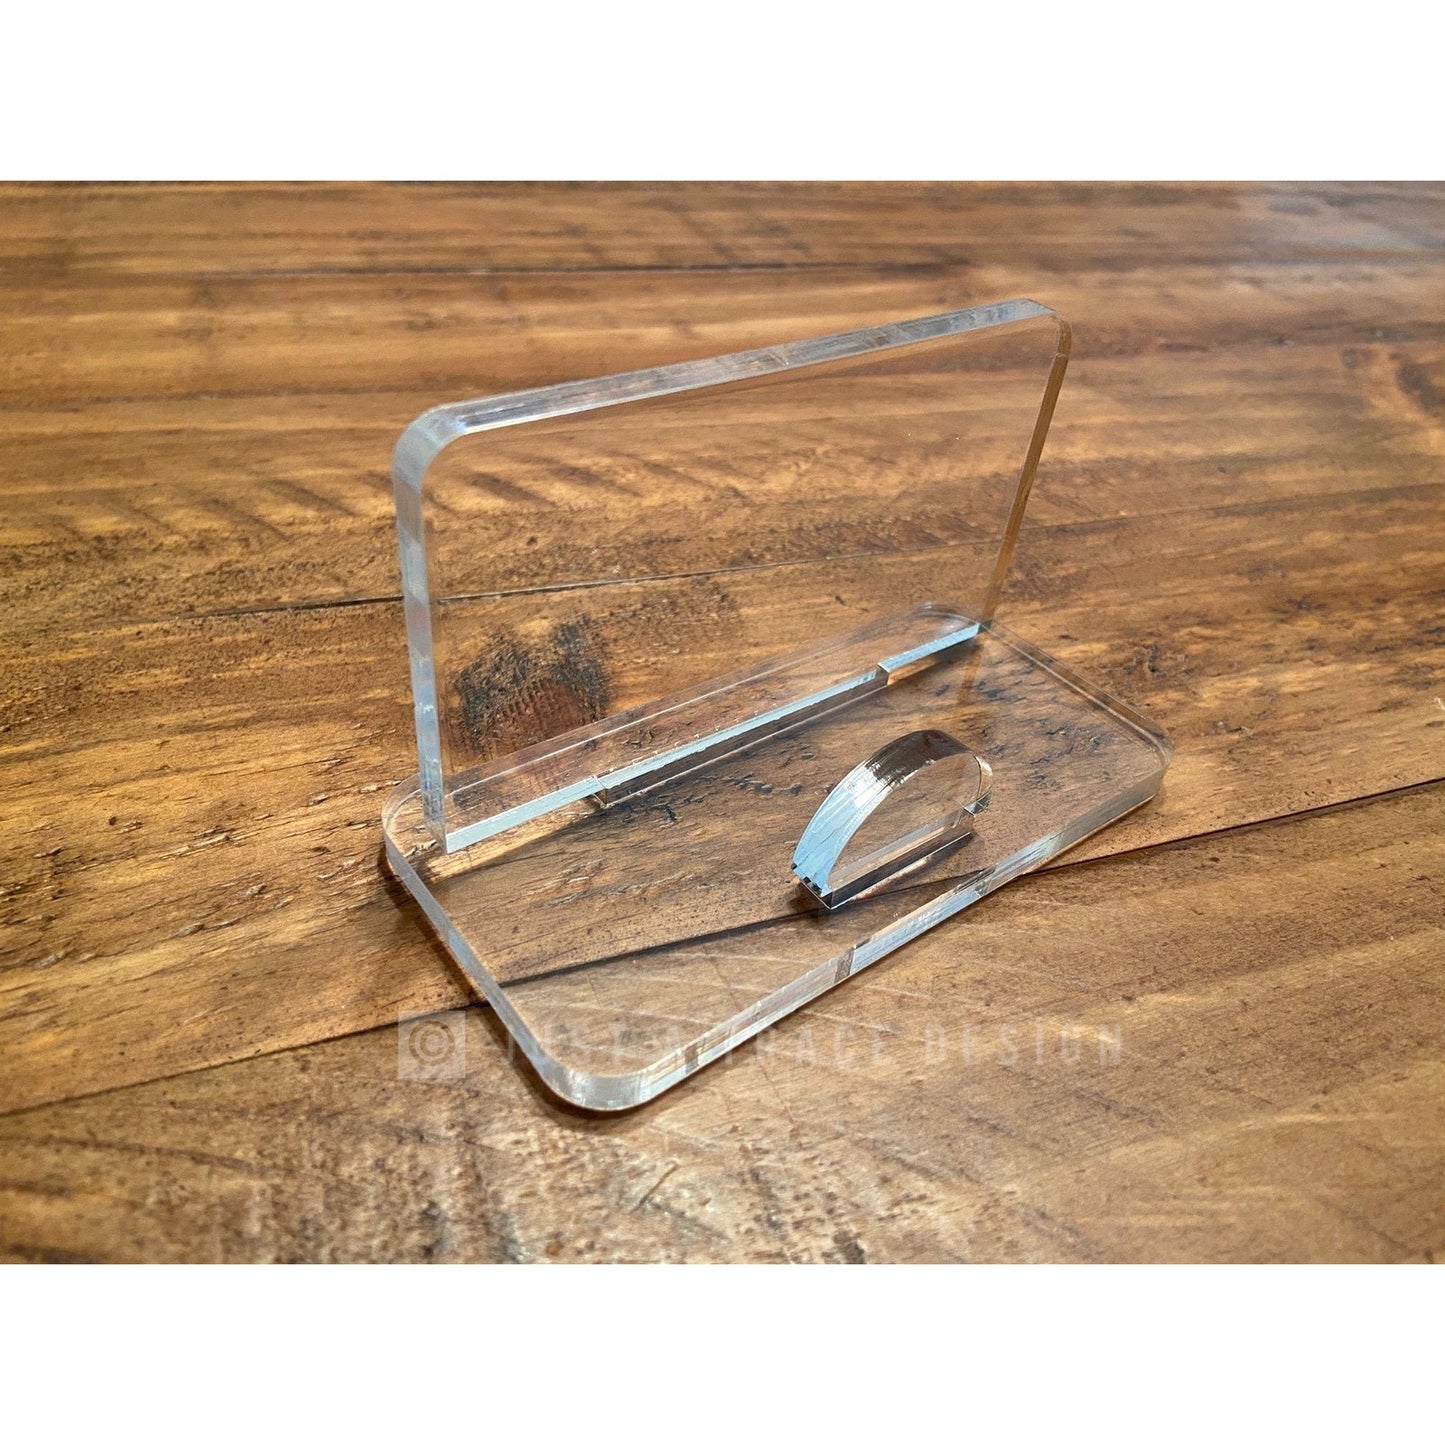 Acrylic Business Card Holder | Office Desk Accessory | Display Stand | Storage